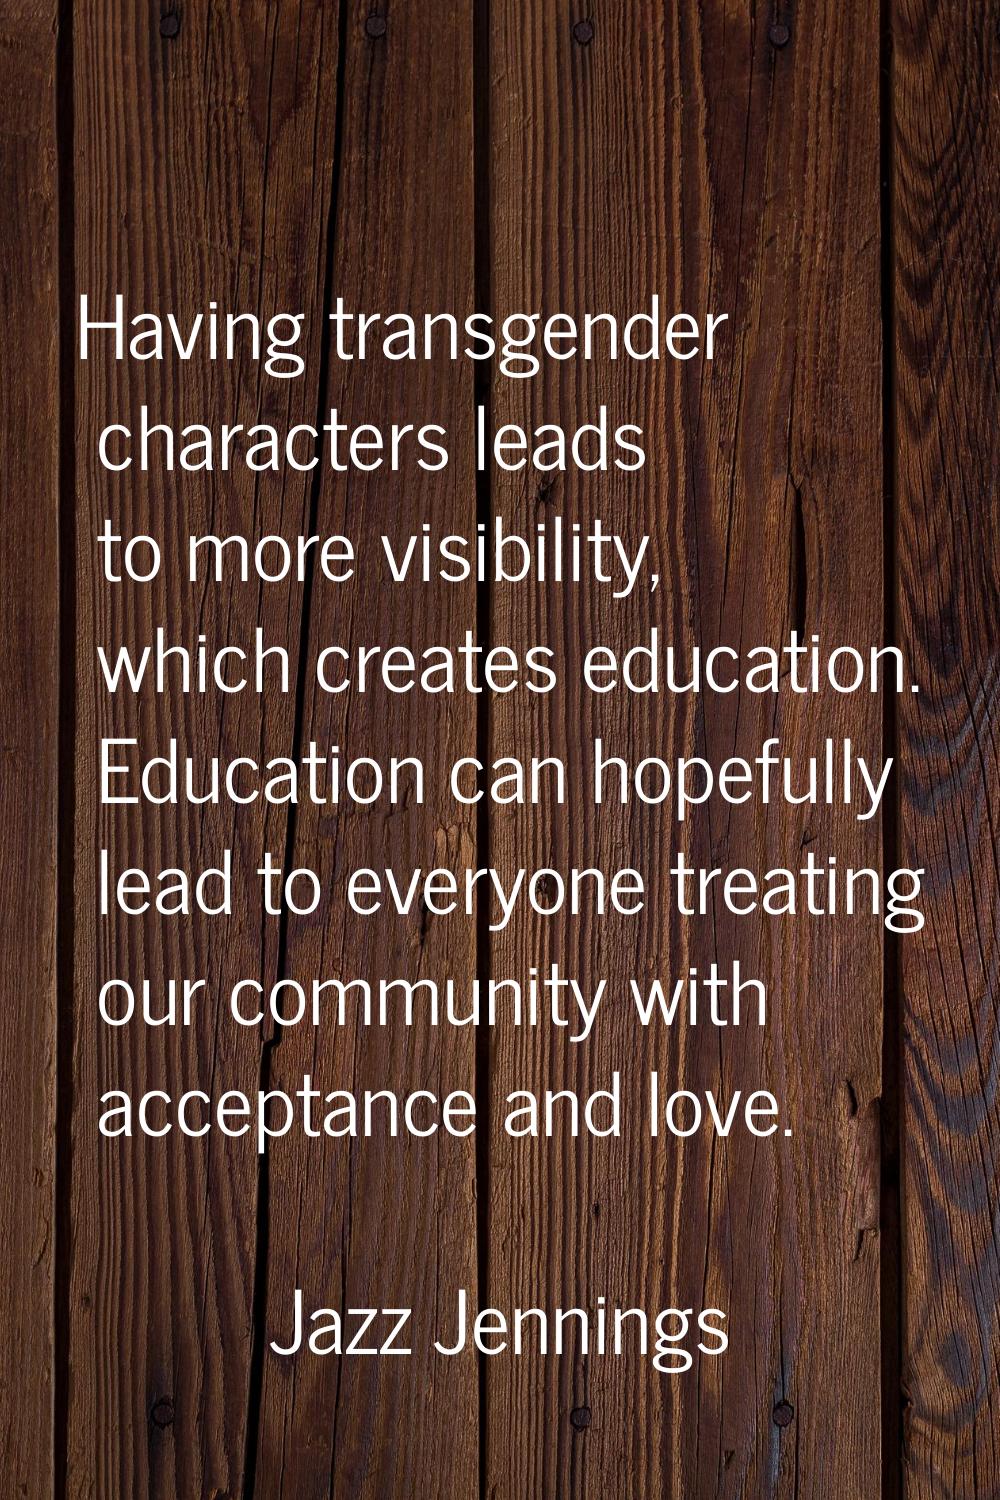 Having transgender characters leads to more visibility, which creates education. Education can hope